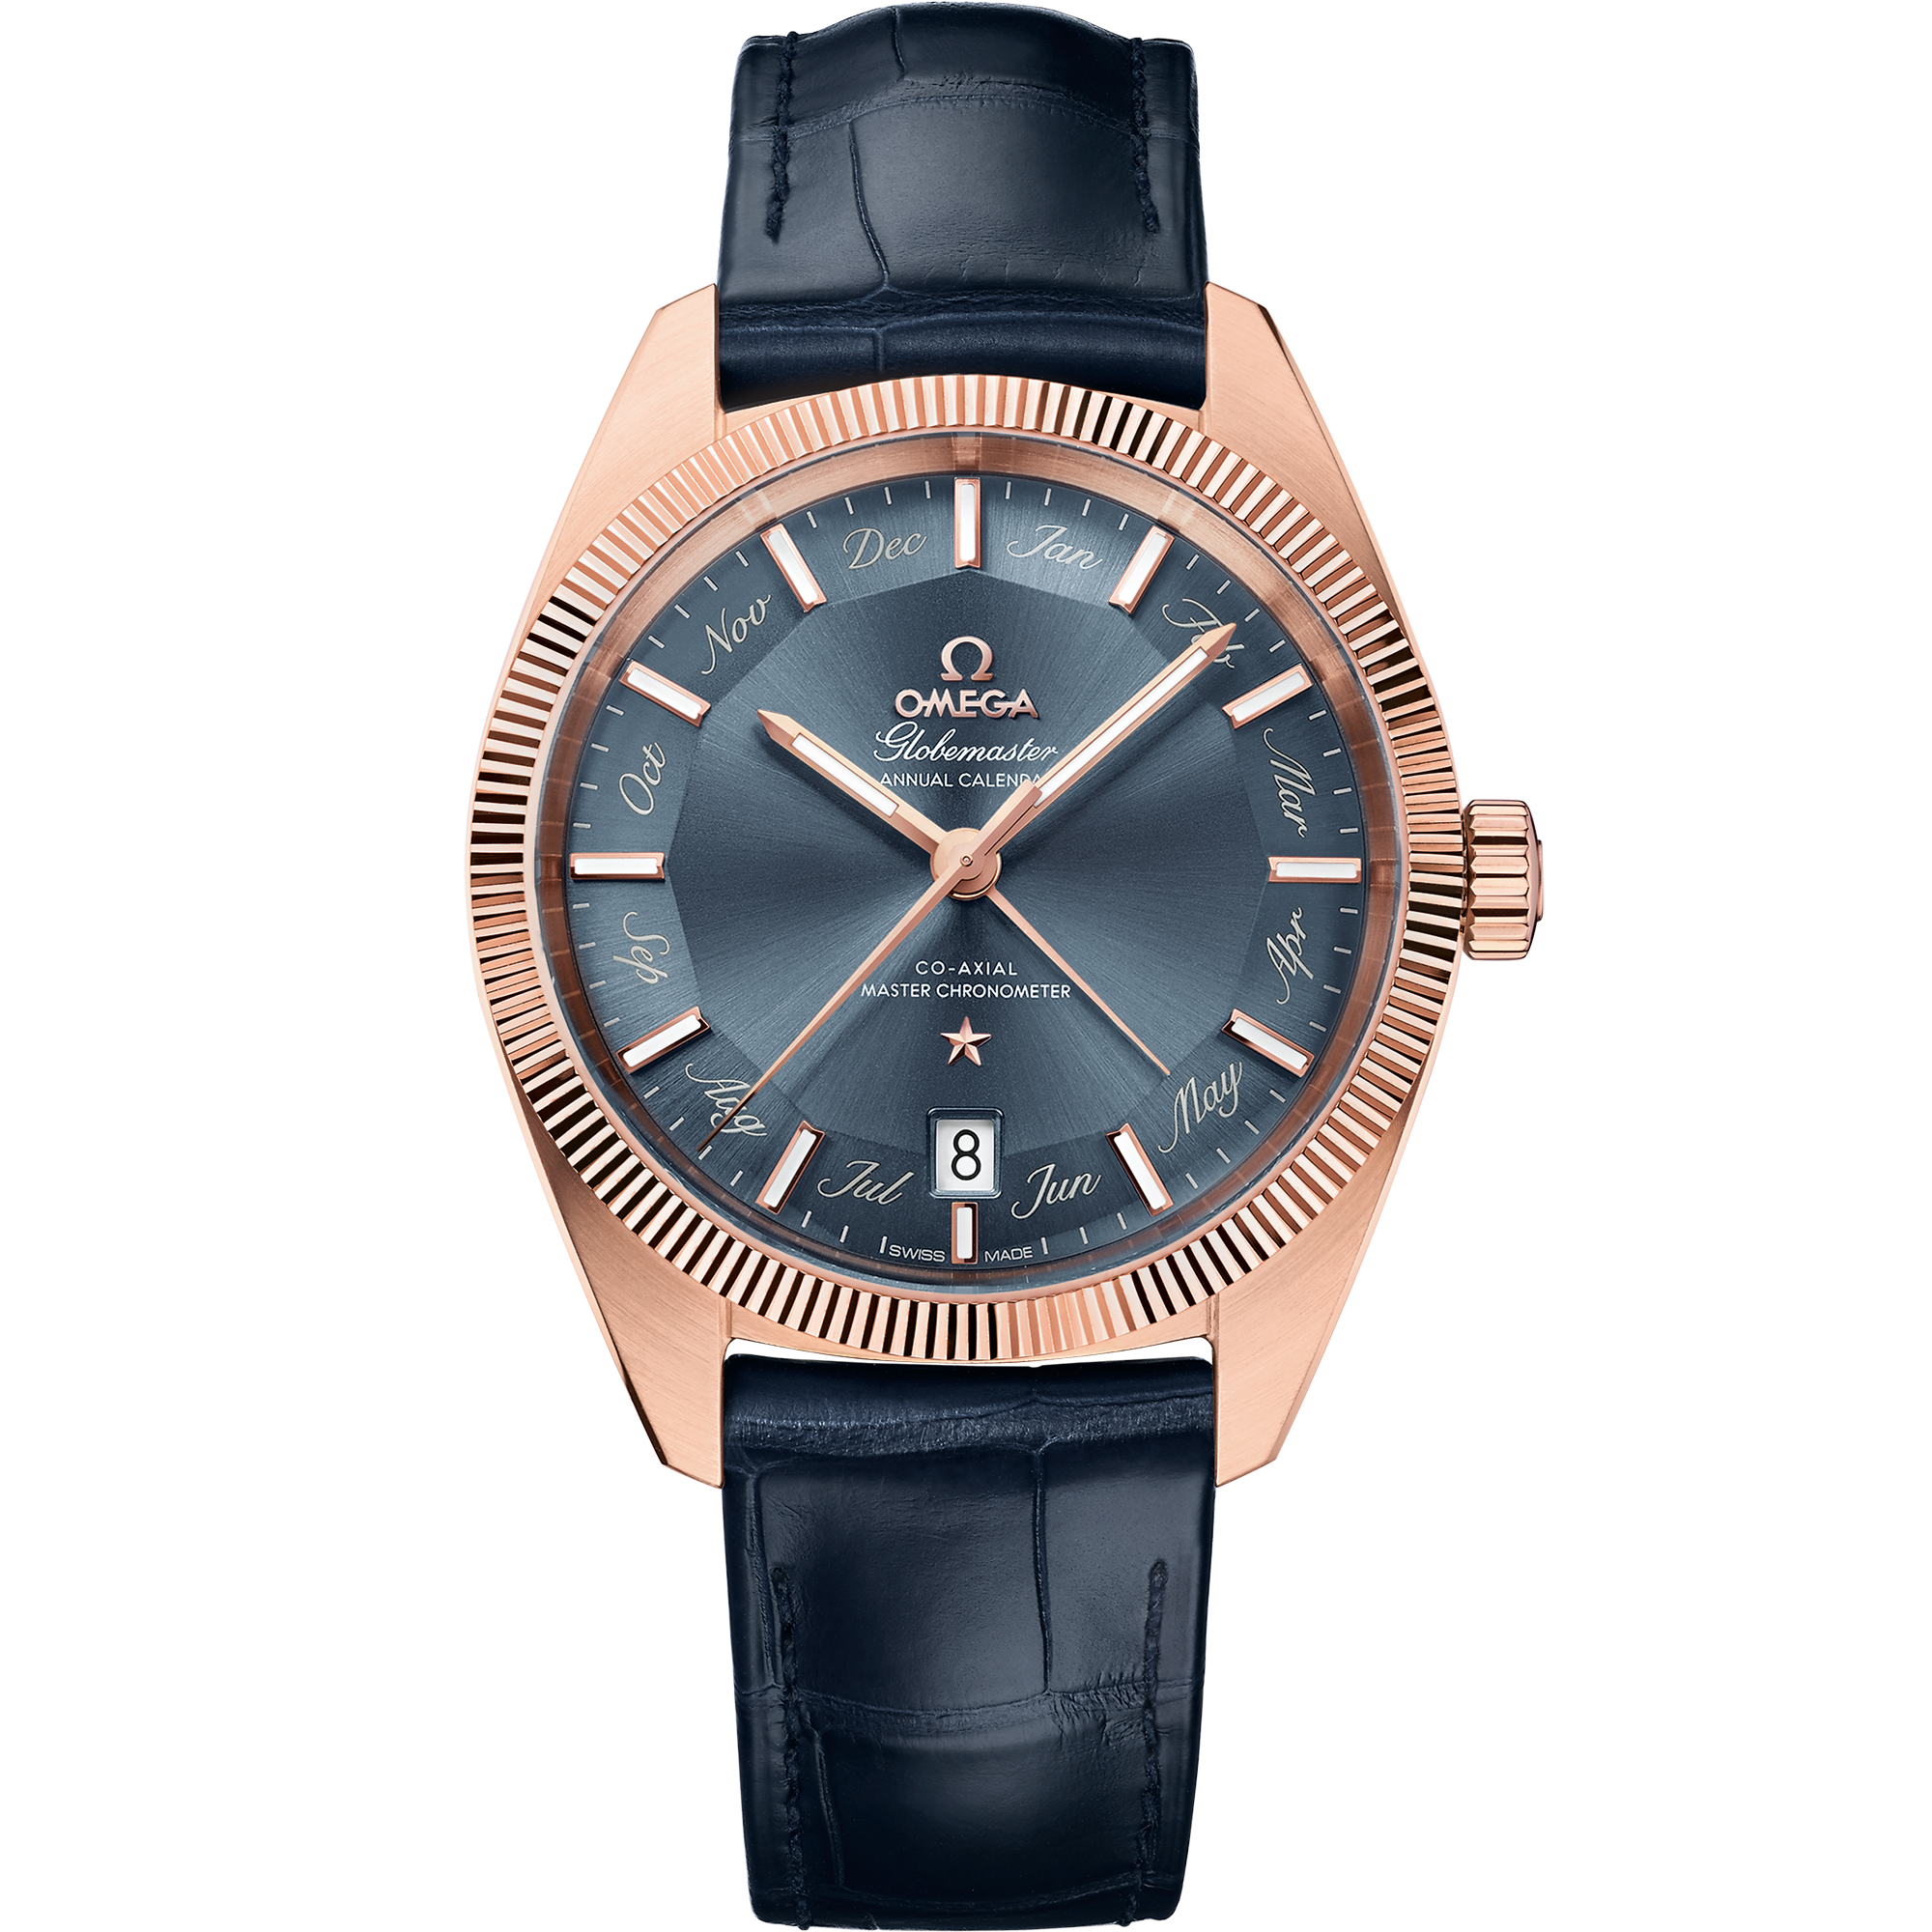 Constellation 41 mm, Sedna™ gold on leather strap - 130.53.41.22.03.001